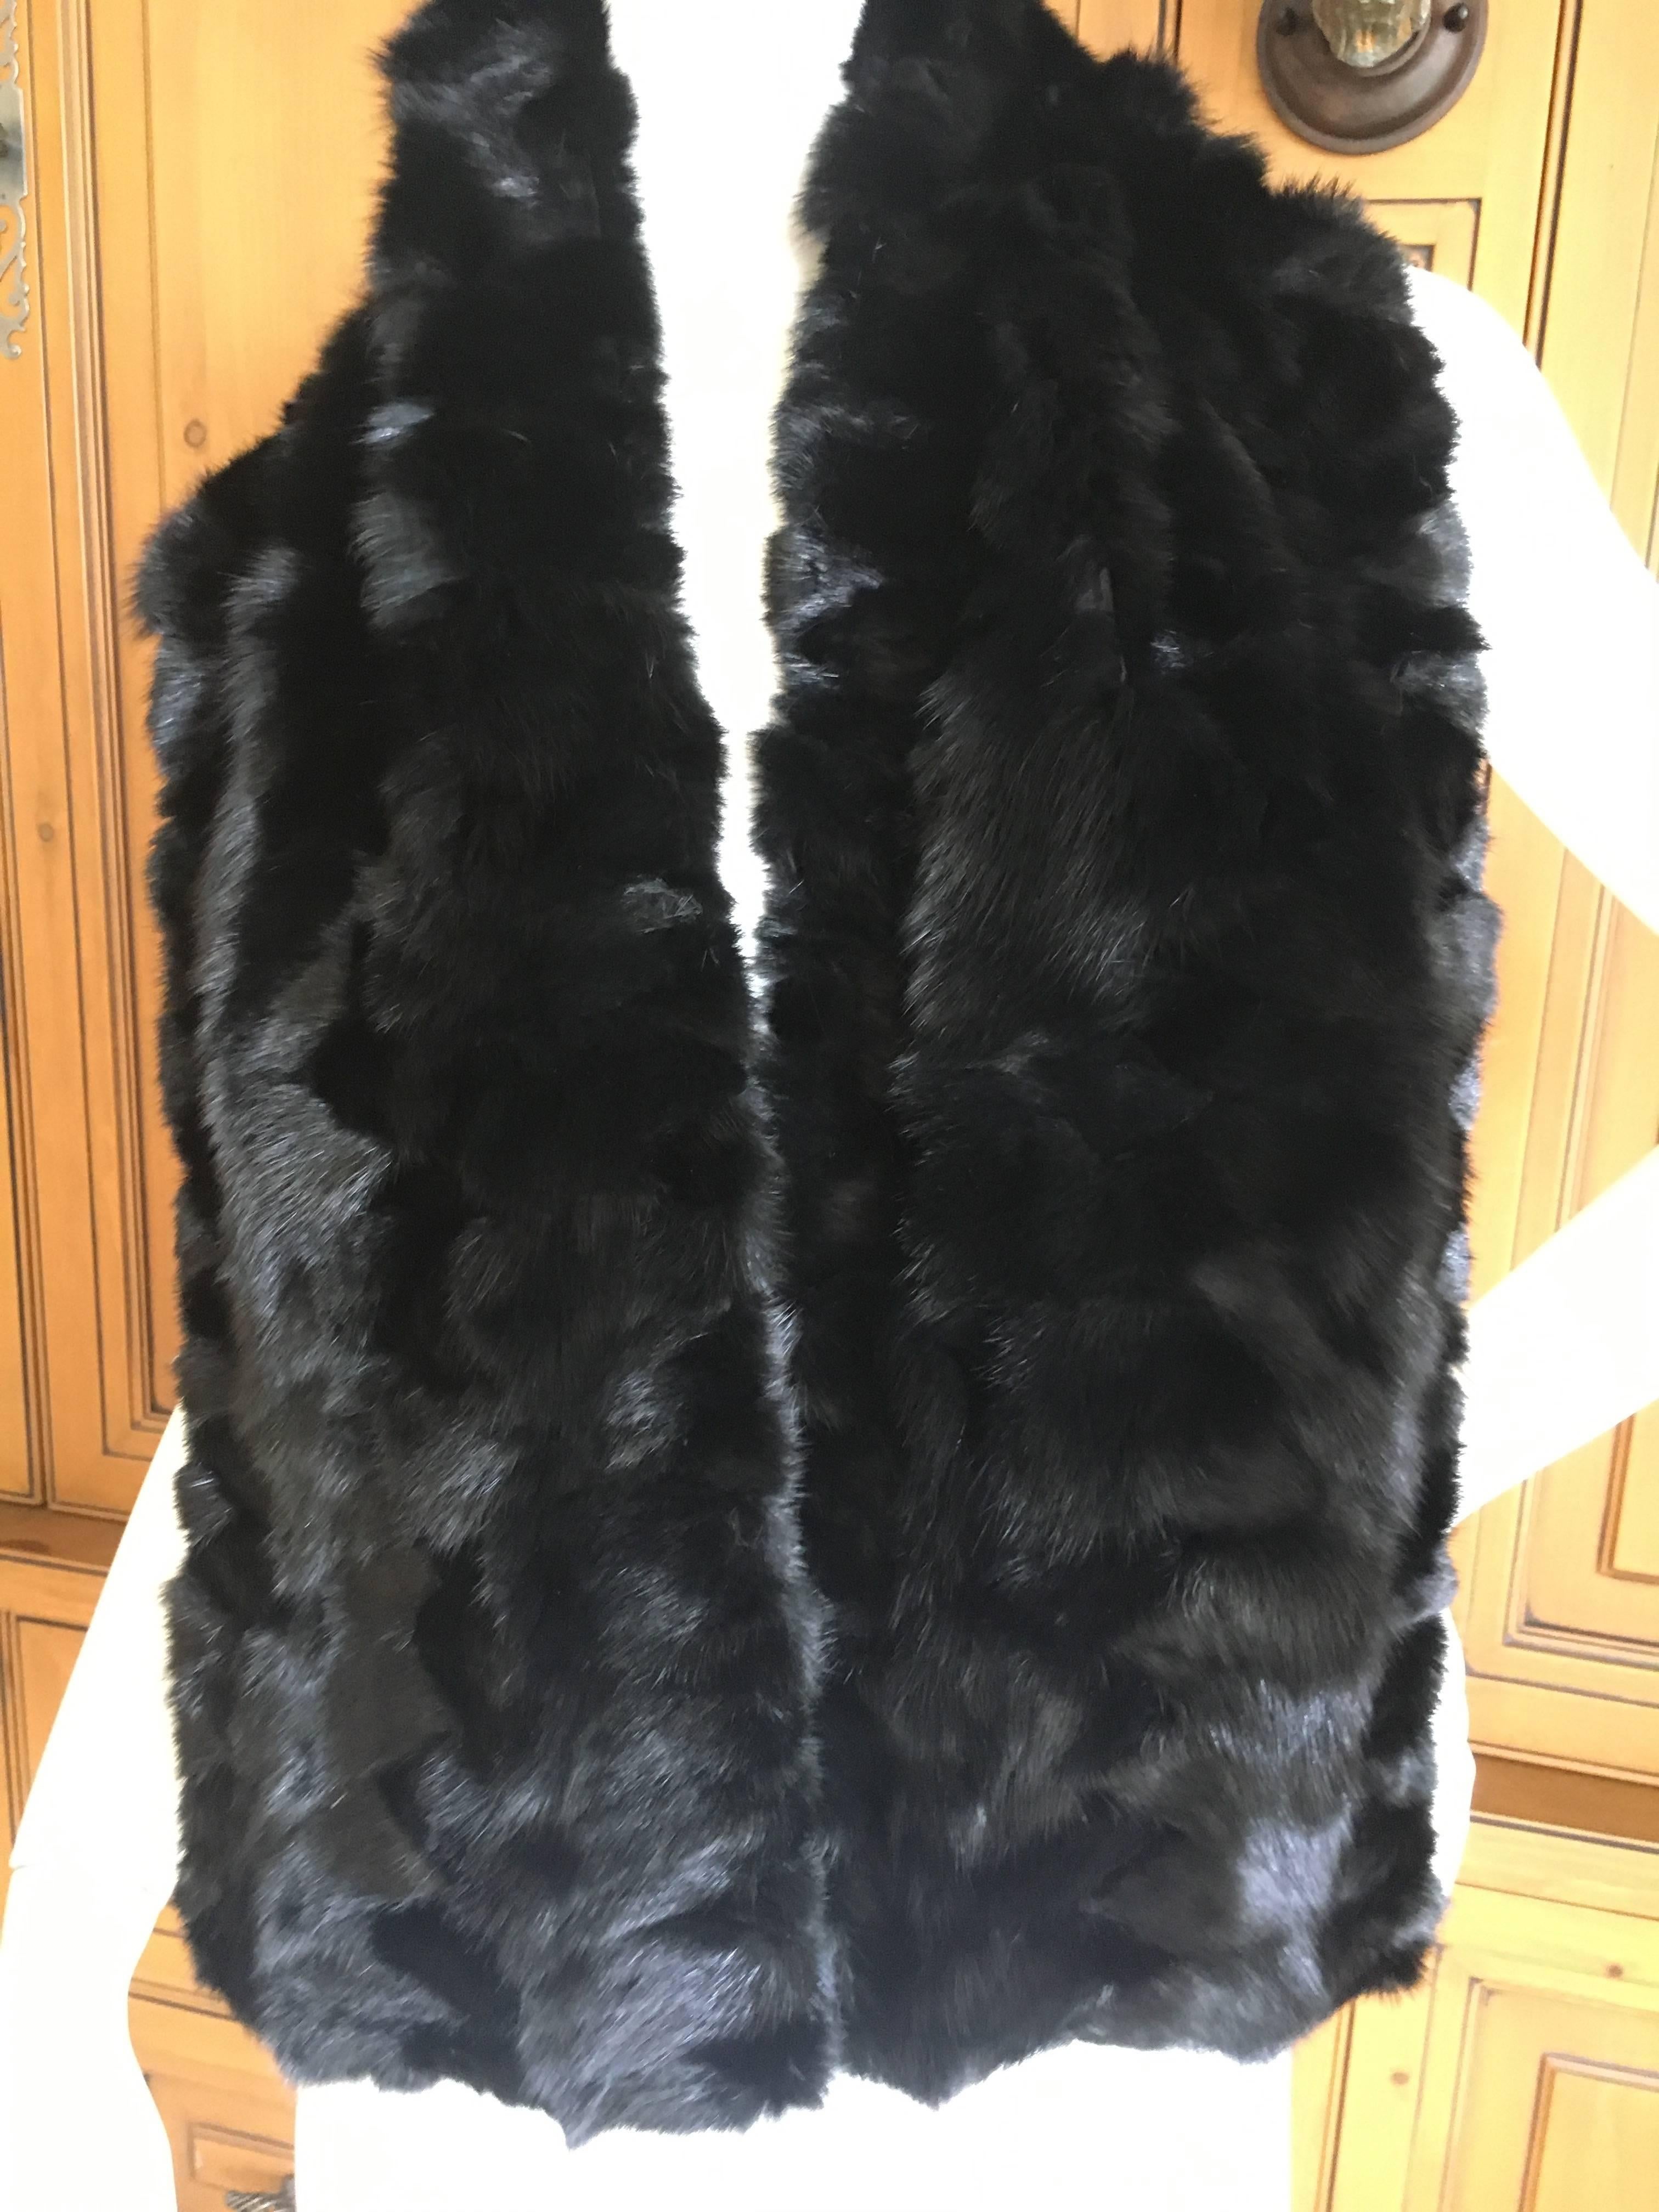 Luxurious Loro Piana Russian sable scarf.

Lined in pure black cashmere, this is as soft as can be.

Black Russian Sable (Zebellina)

52" x  9"

Belt not included , used for styling only.